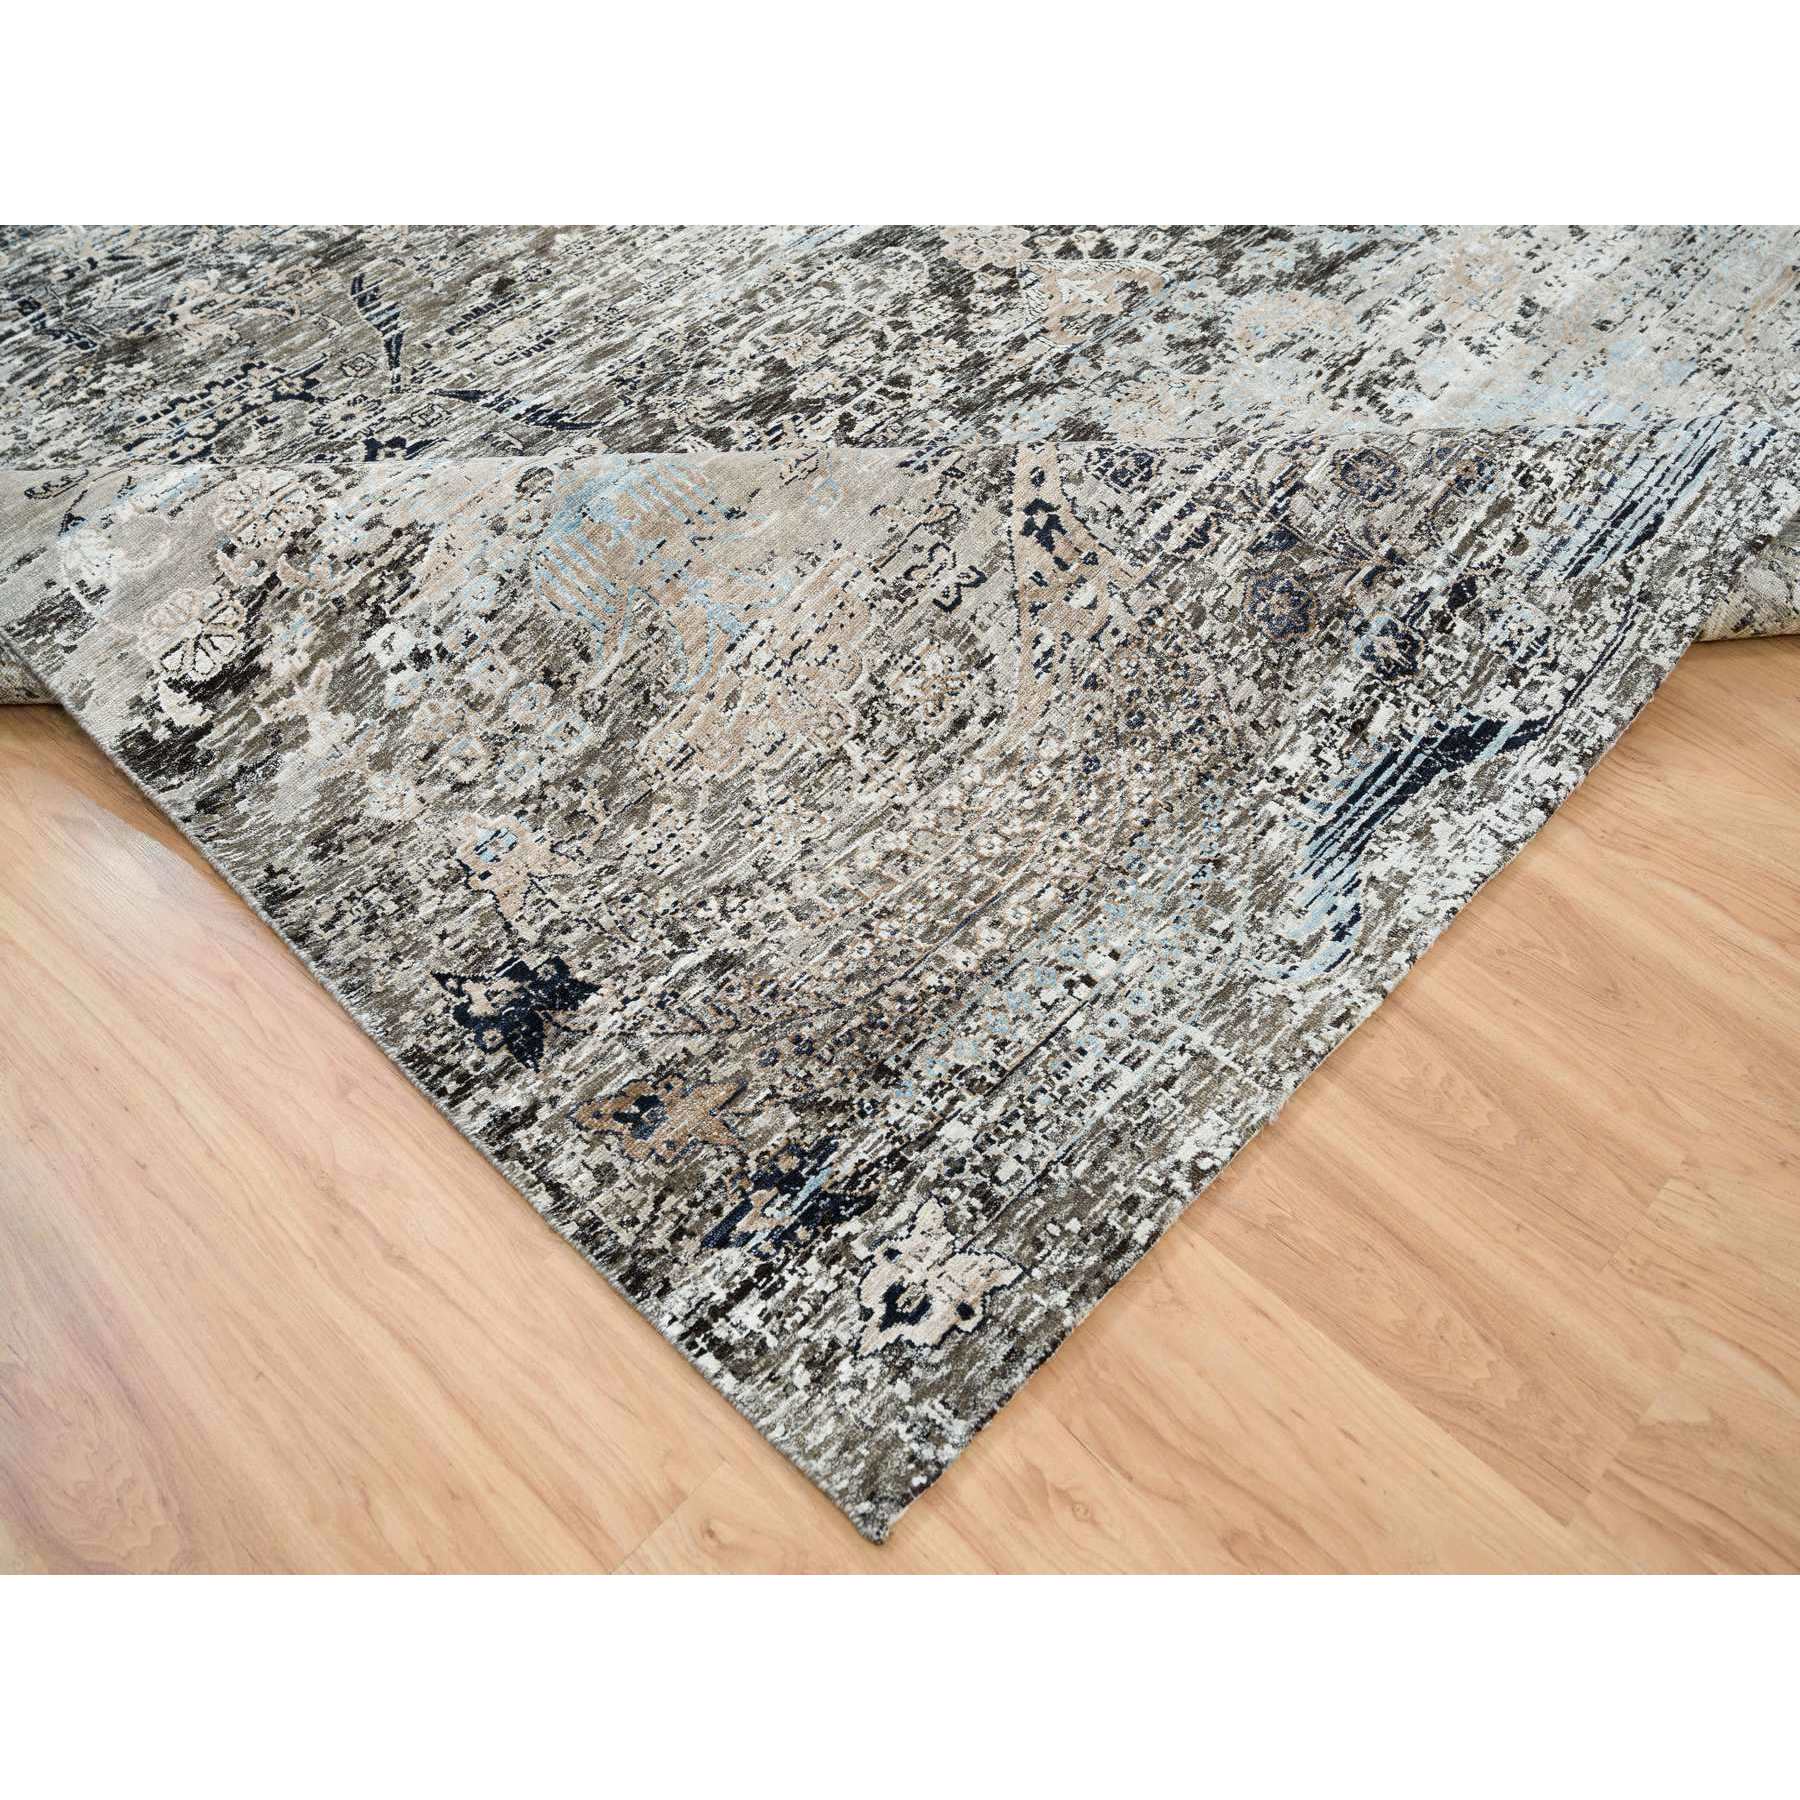  Silk Hand-Knotted Area Rug 11'9